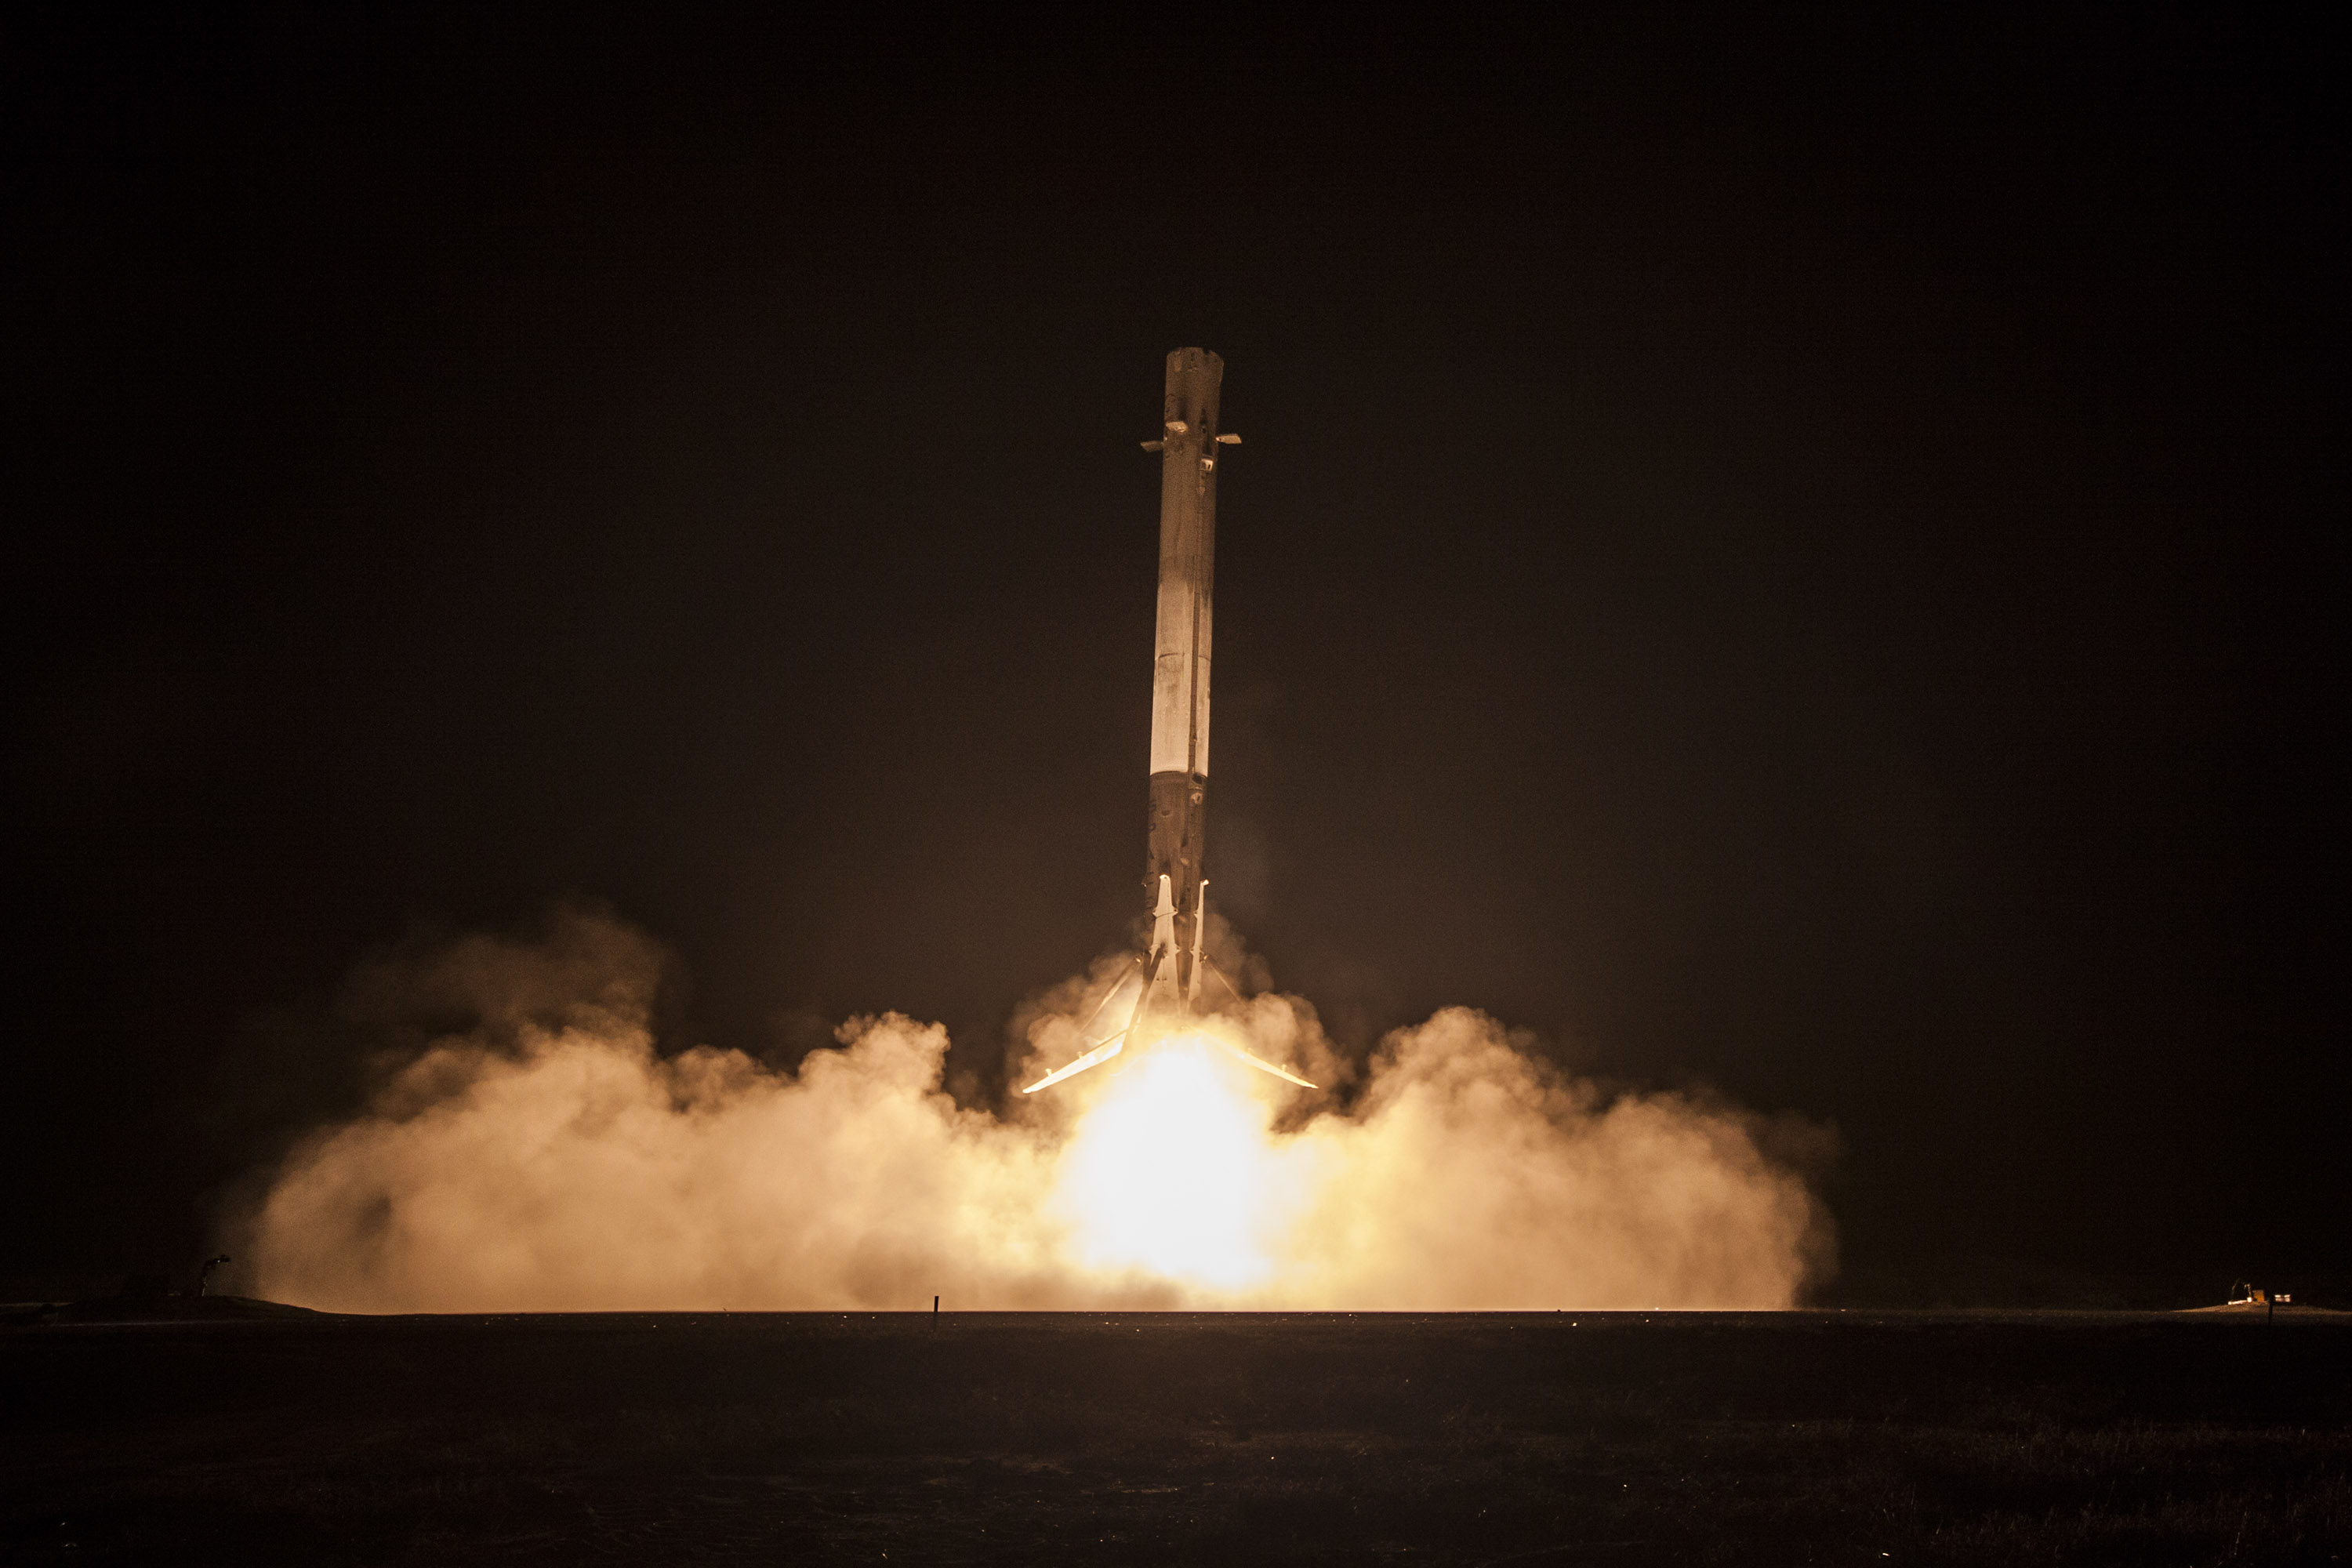 SpaceX rocket damaged by high velocity on reentry but touches down safely